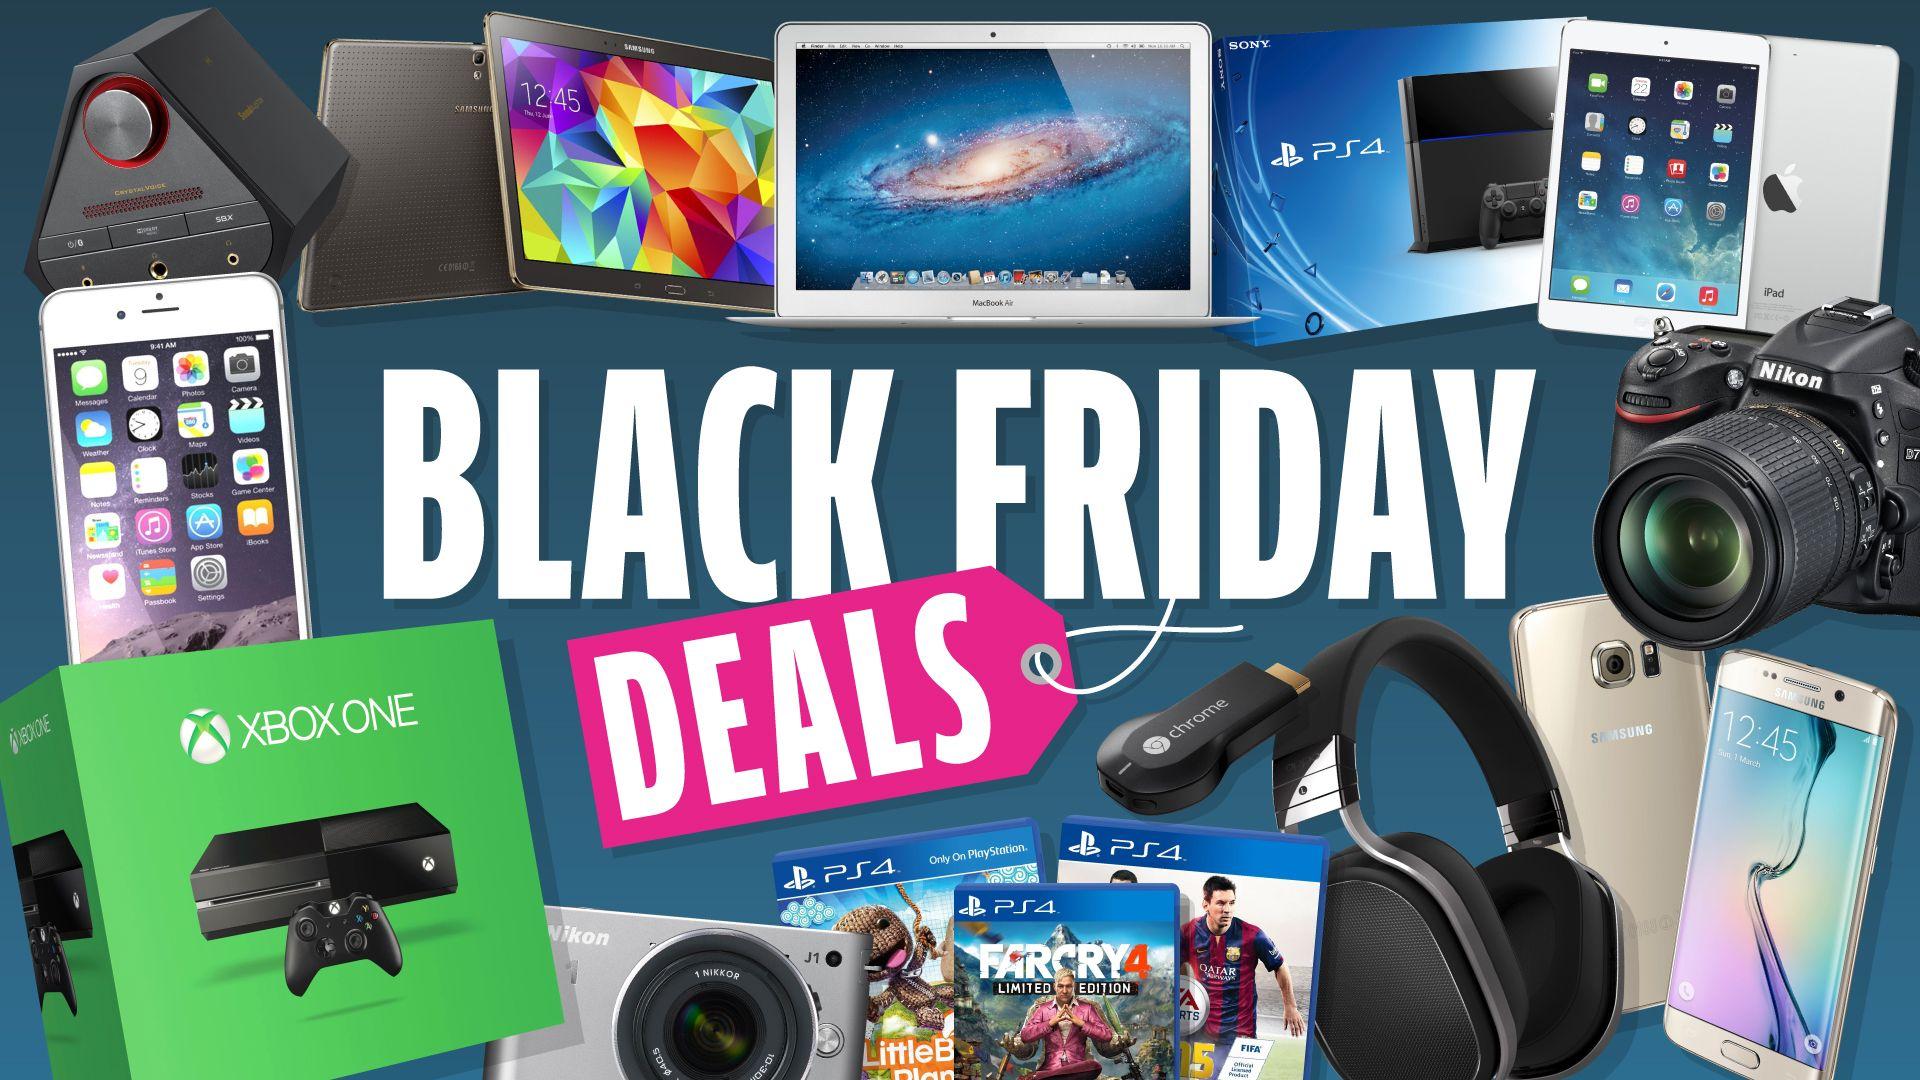 Black Friday 2017 sales in Australia: how to find the best deals